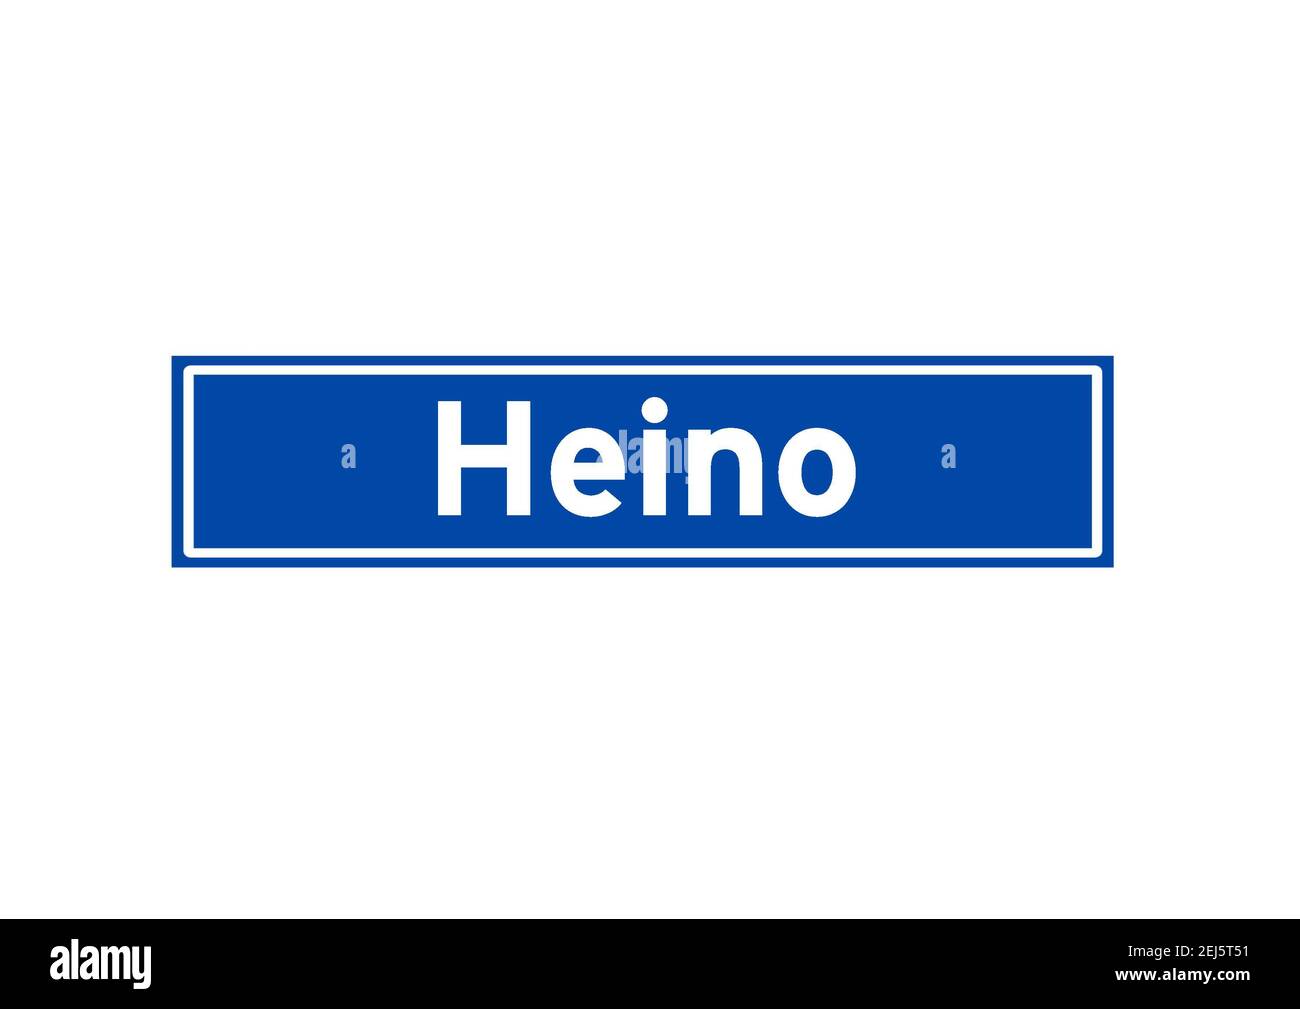 Heino isolated Dutch place name sign. City sign from the Netherlands. Stock Photo